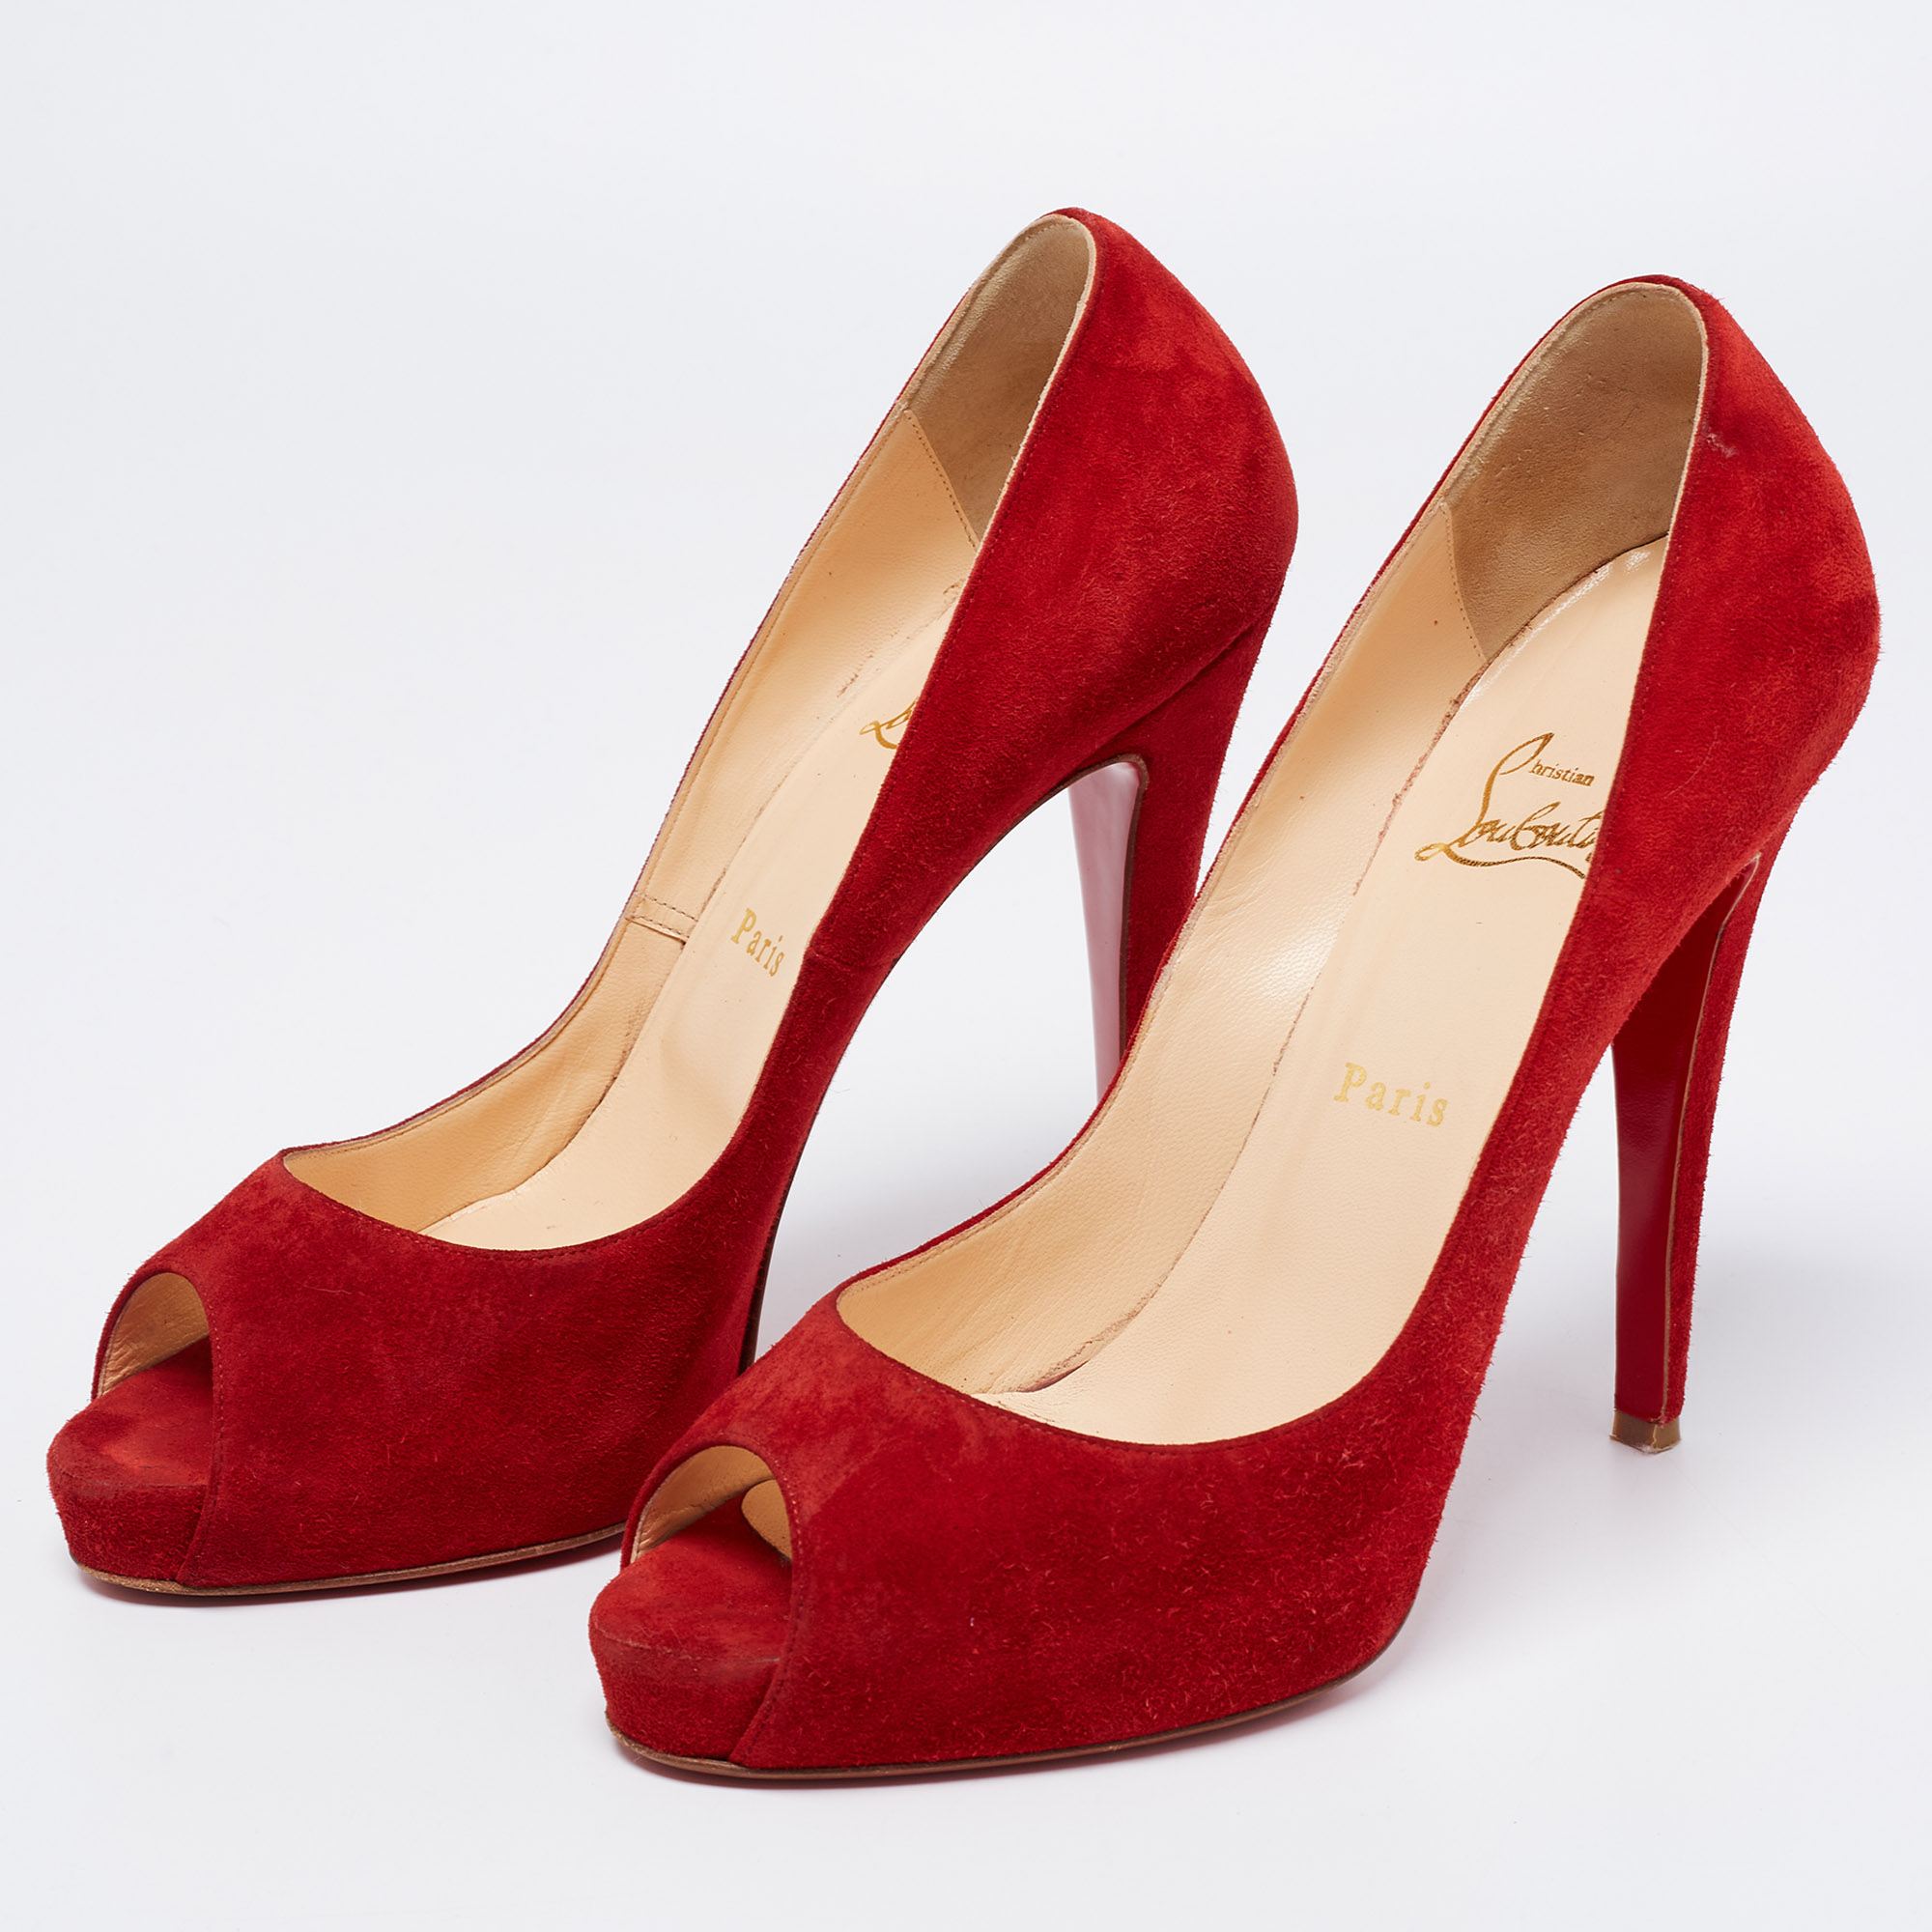   The Luxury Closet Christian Louboutin Red Suede New Very Prive Peep Toe Platform Pumps Size 41